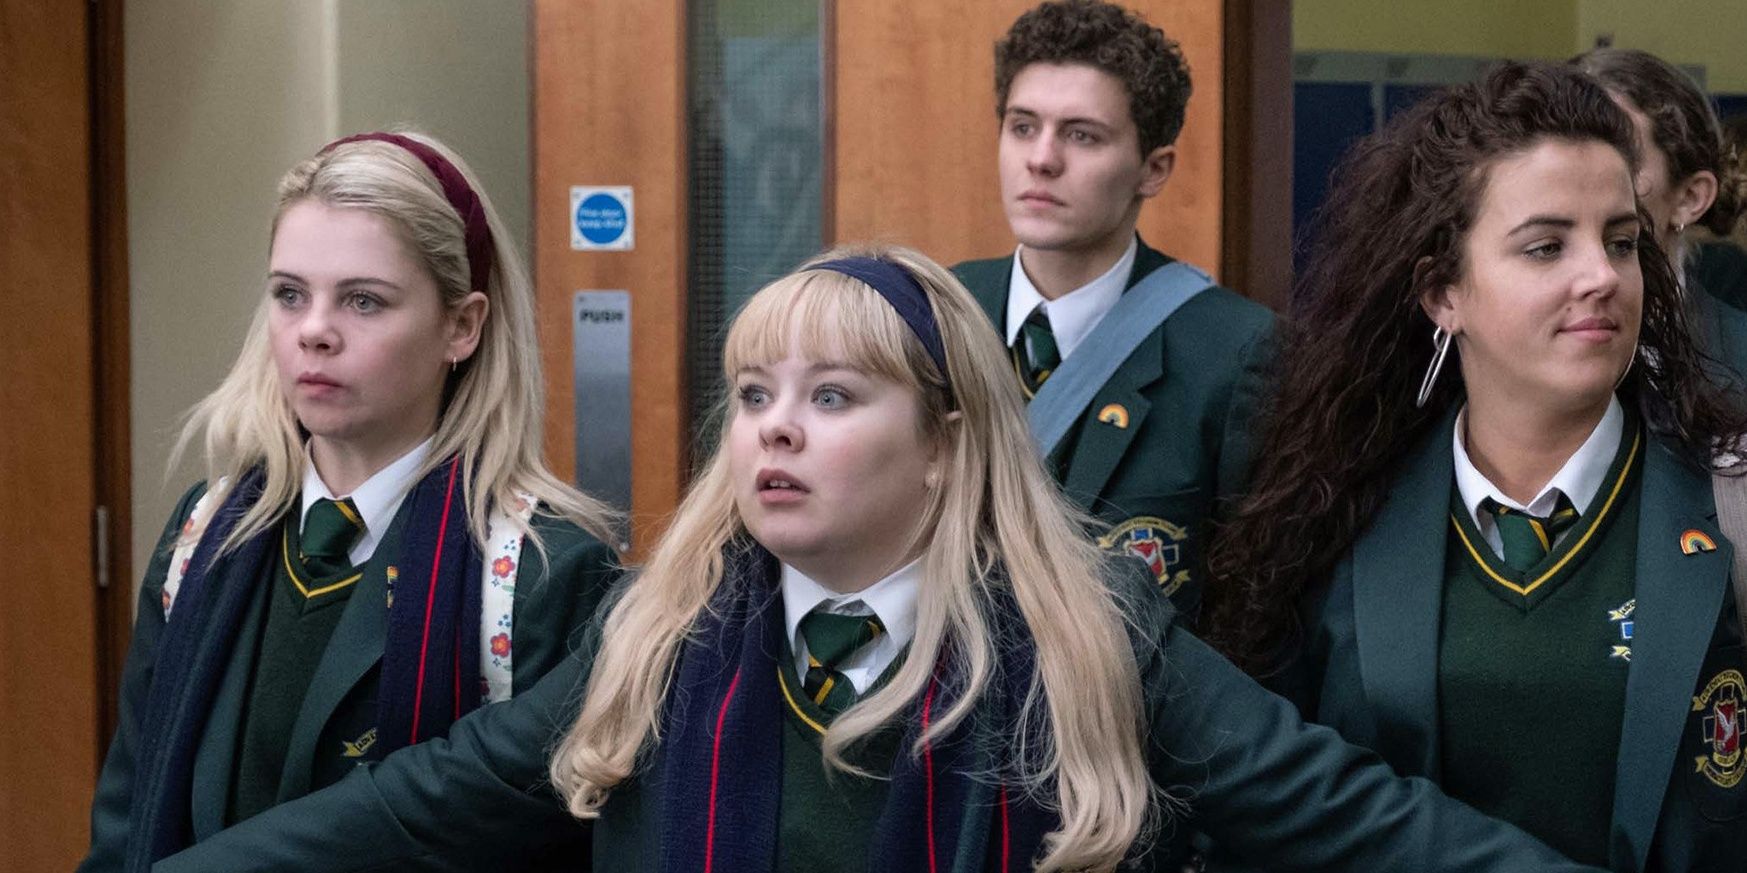 Nicola Coughlan as Clare Devlin stands in front of her friends on Derry Girls